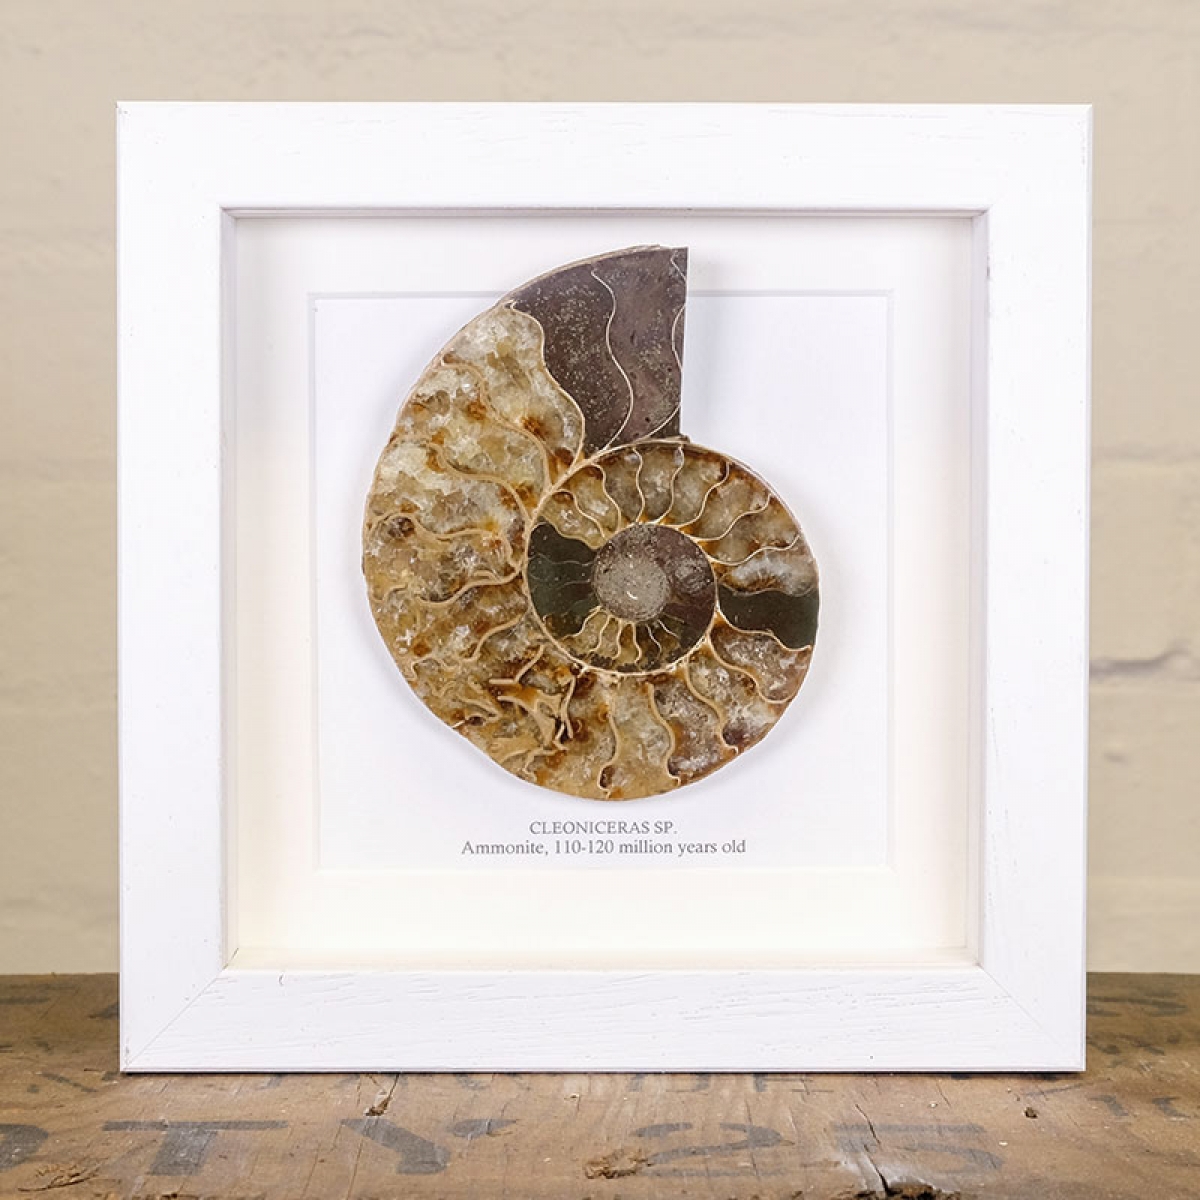 Ammonite Cut and Polished Fossil in Box Frame (Cleoniceras sp) - Specimen #12